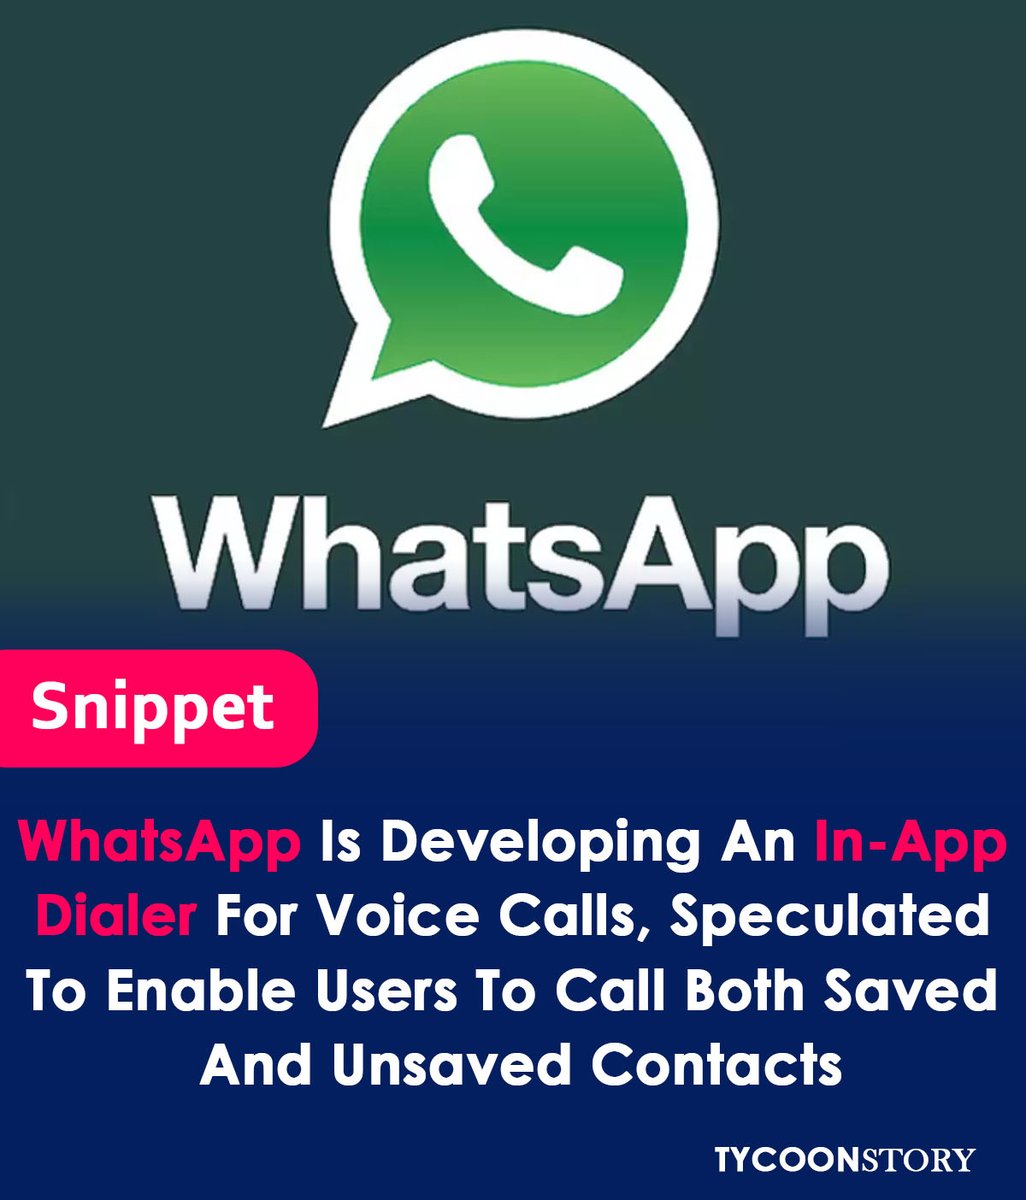 WhatsApp is developing an in-app dialer for voice calls
#WhatsApp #newfeature #dialer #audiocalls #inapp #betaprogram #WABetaInfo #Android #messaging #contactlist #userexperience #communications #WhatsAppCalls #InAppDialer #BetaFeature #ContactlessCalls @WhatsApp